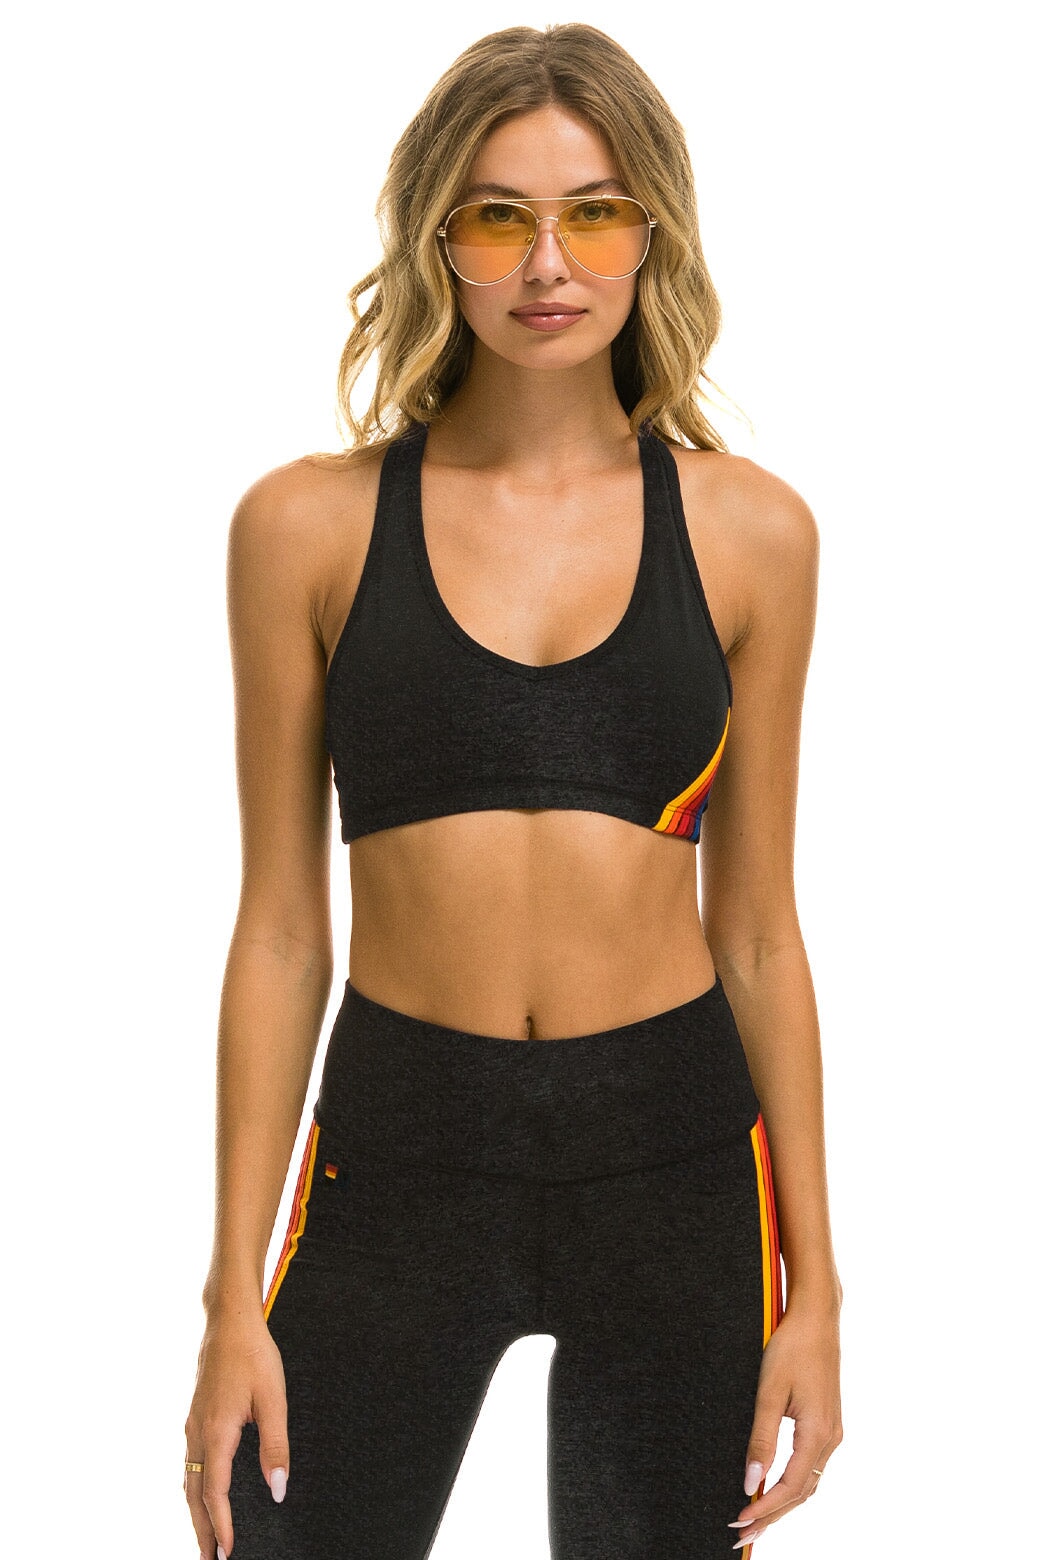 Blue Twin Layer Sport Bra by District Vision on Sale